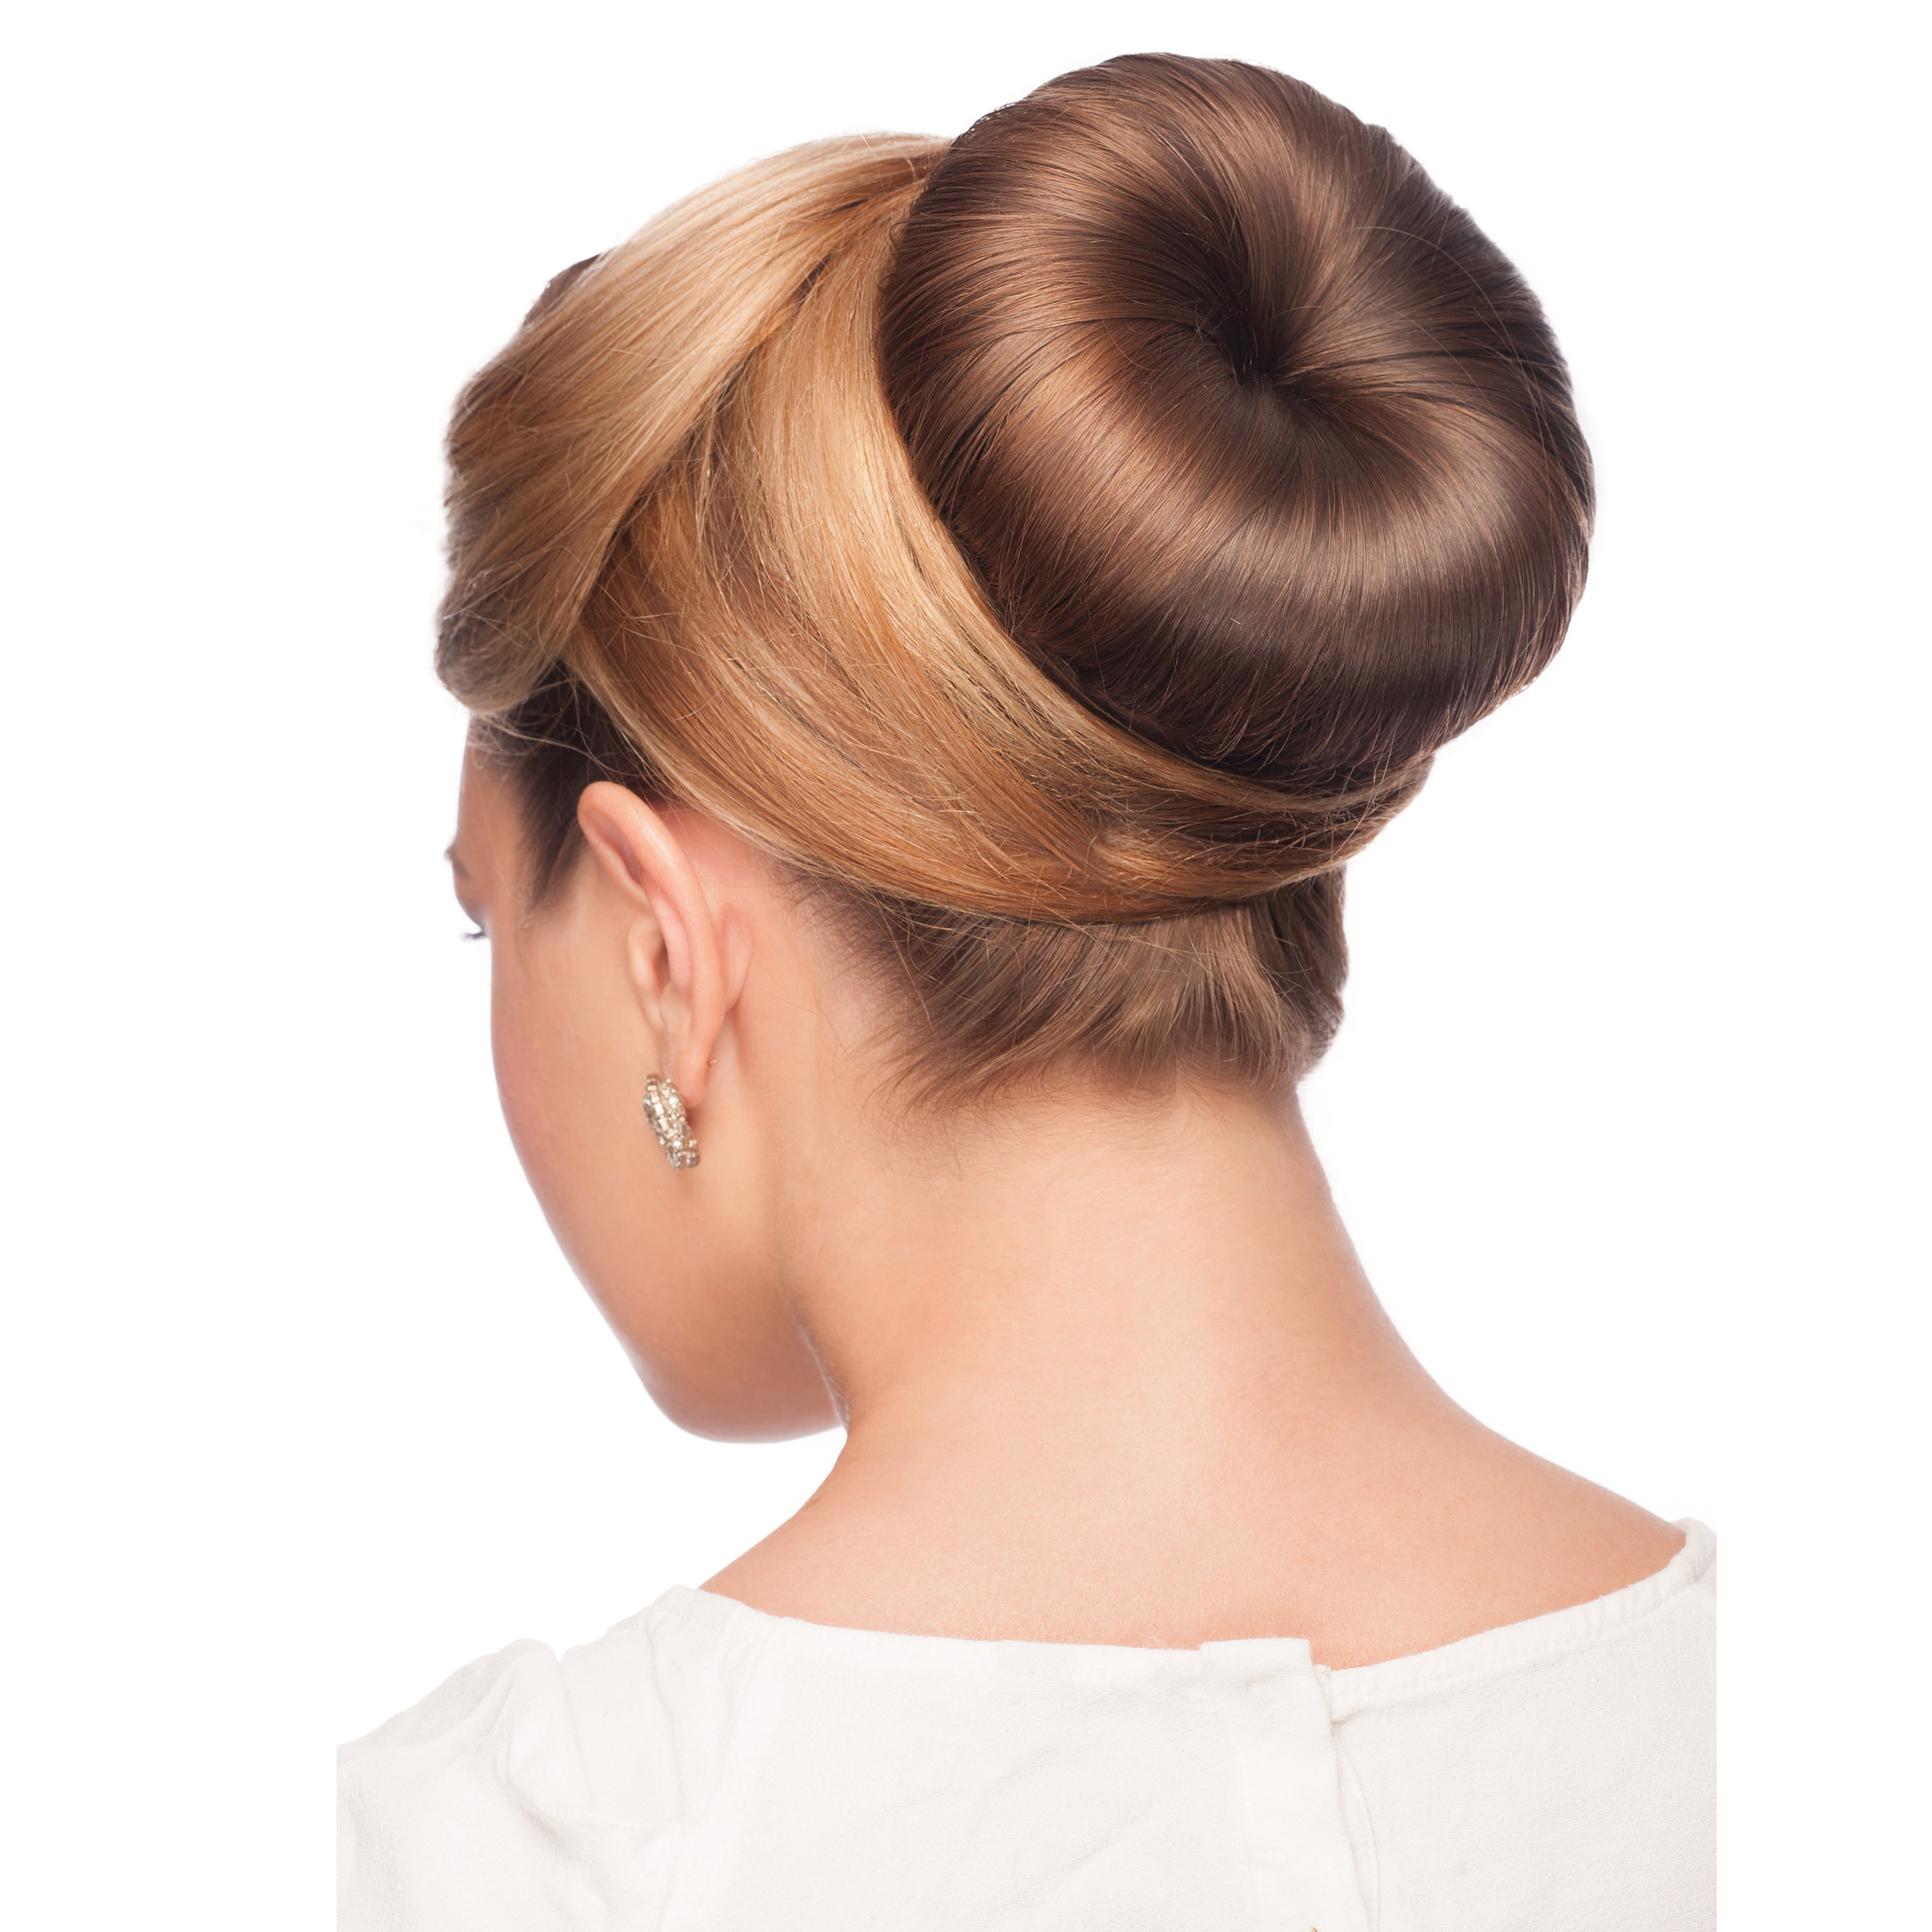 The Difference Between A Bun And A Chignon Explained